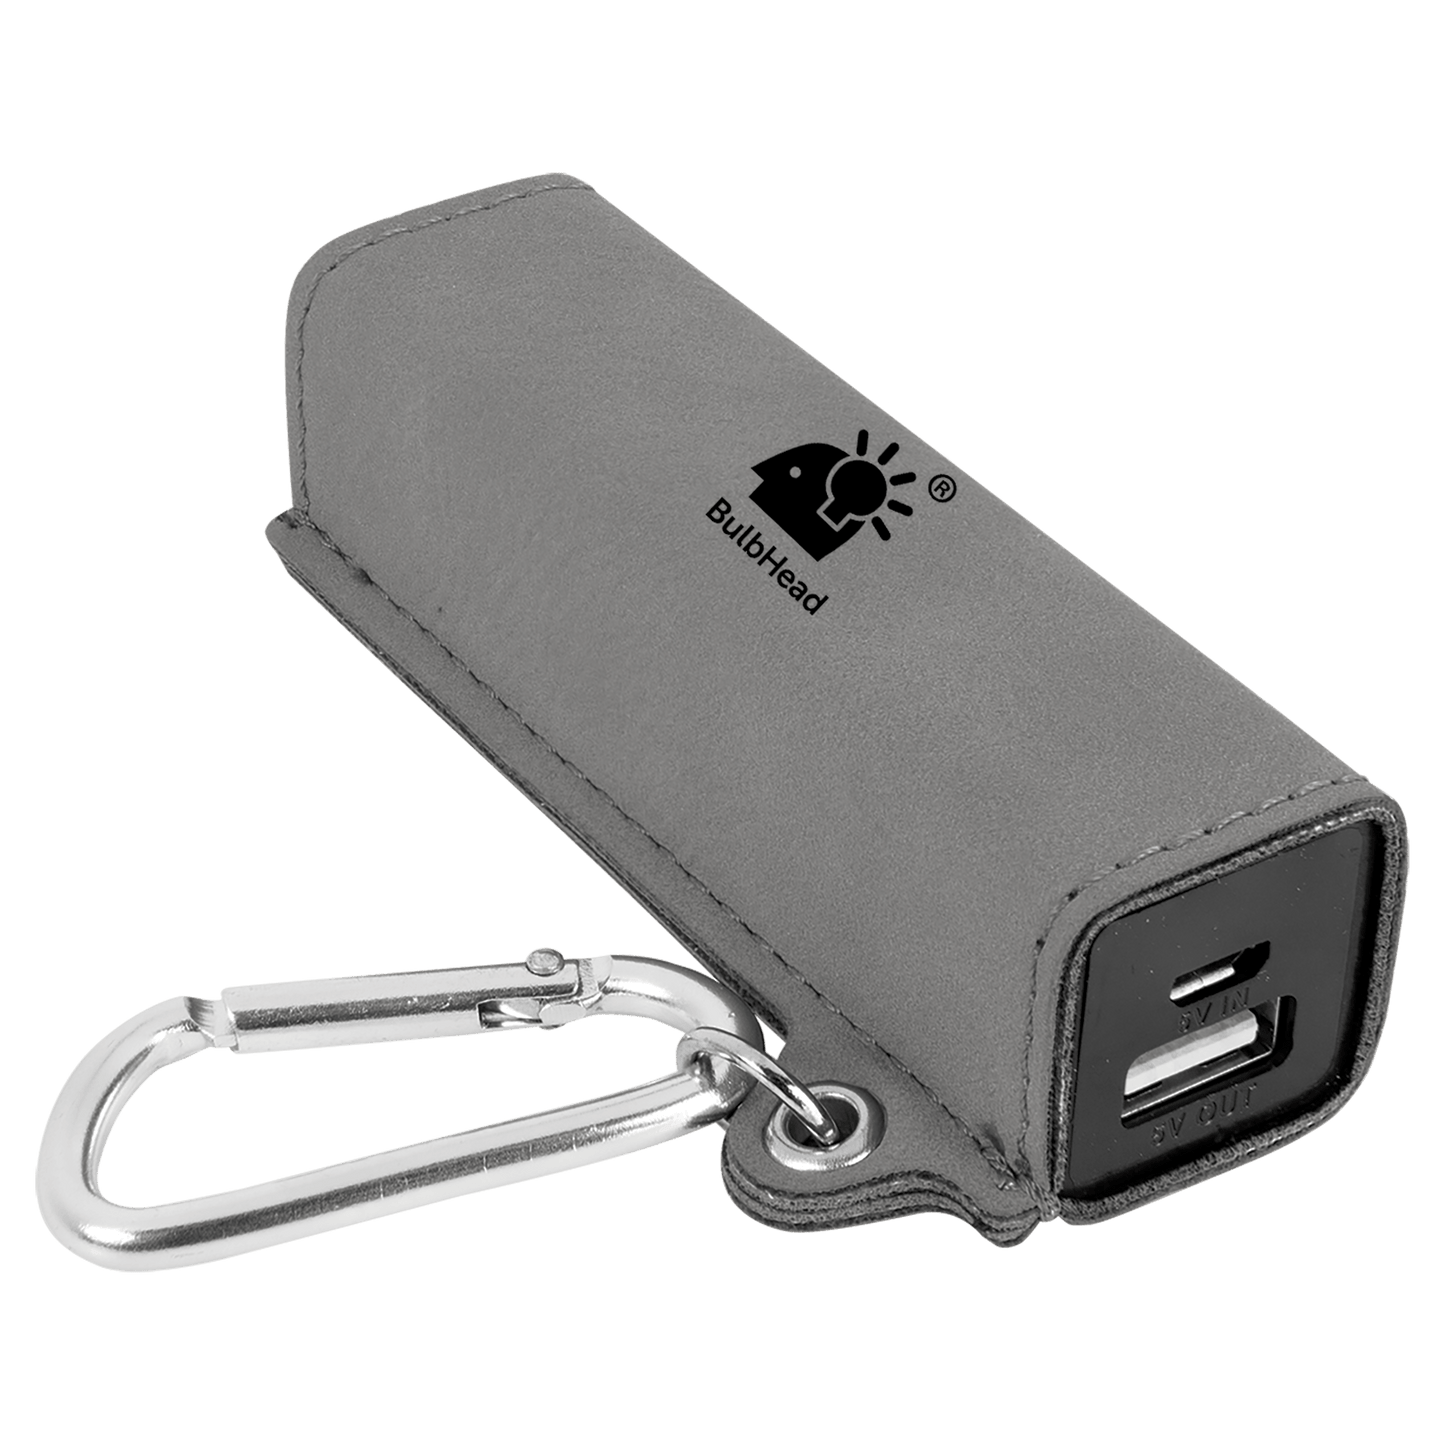 Power Bank with USB Cord